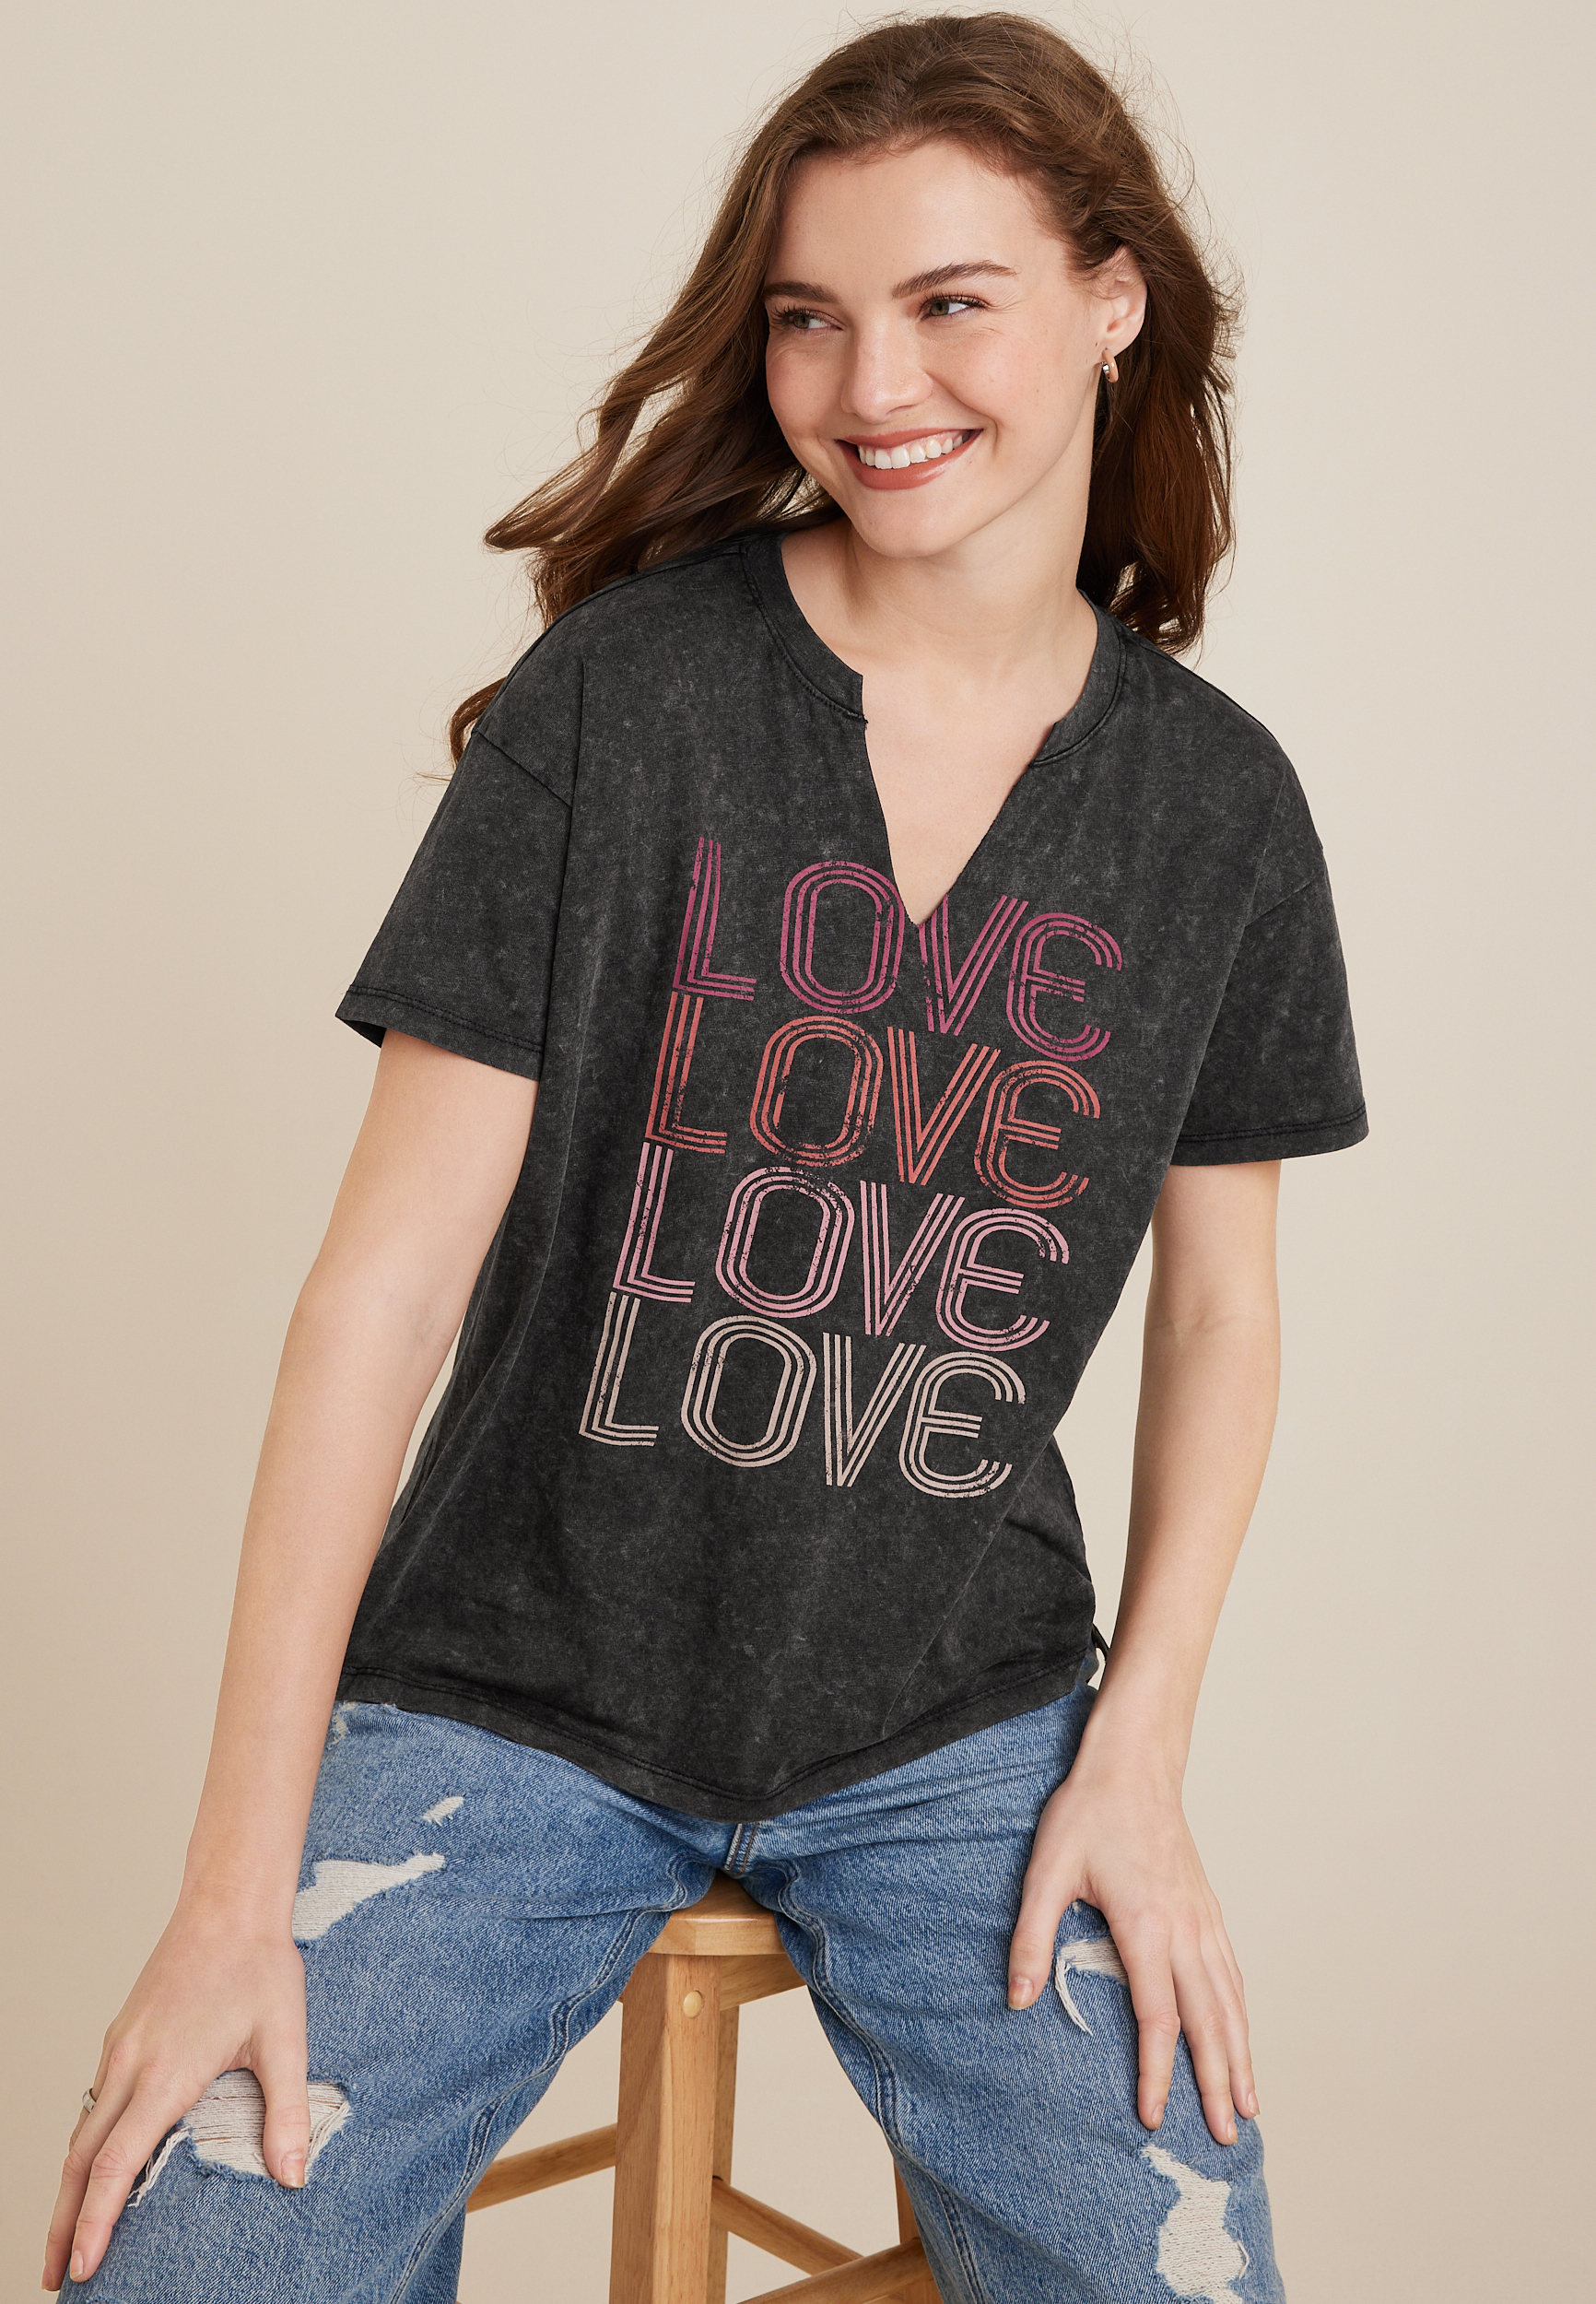 Women\'s T-Shirts | Graphic, Basic Fashion And maurices Tees 